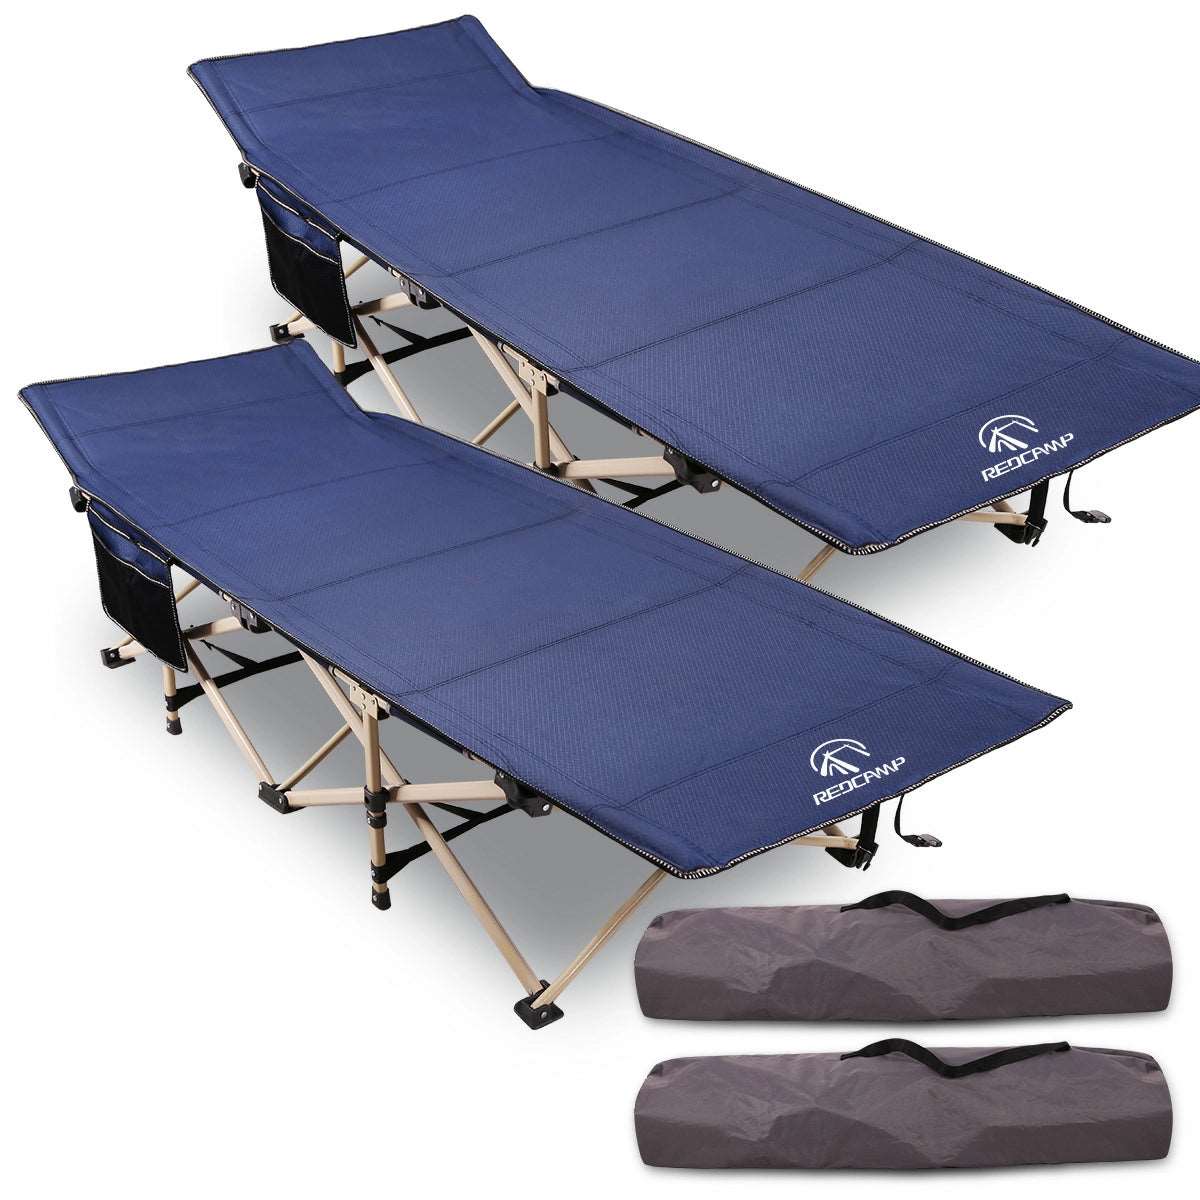 Folding Camping Cots for Adults Heavy Duty,for Camp Office Use